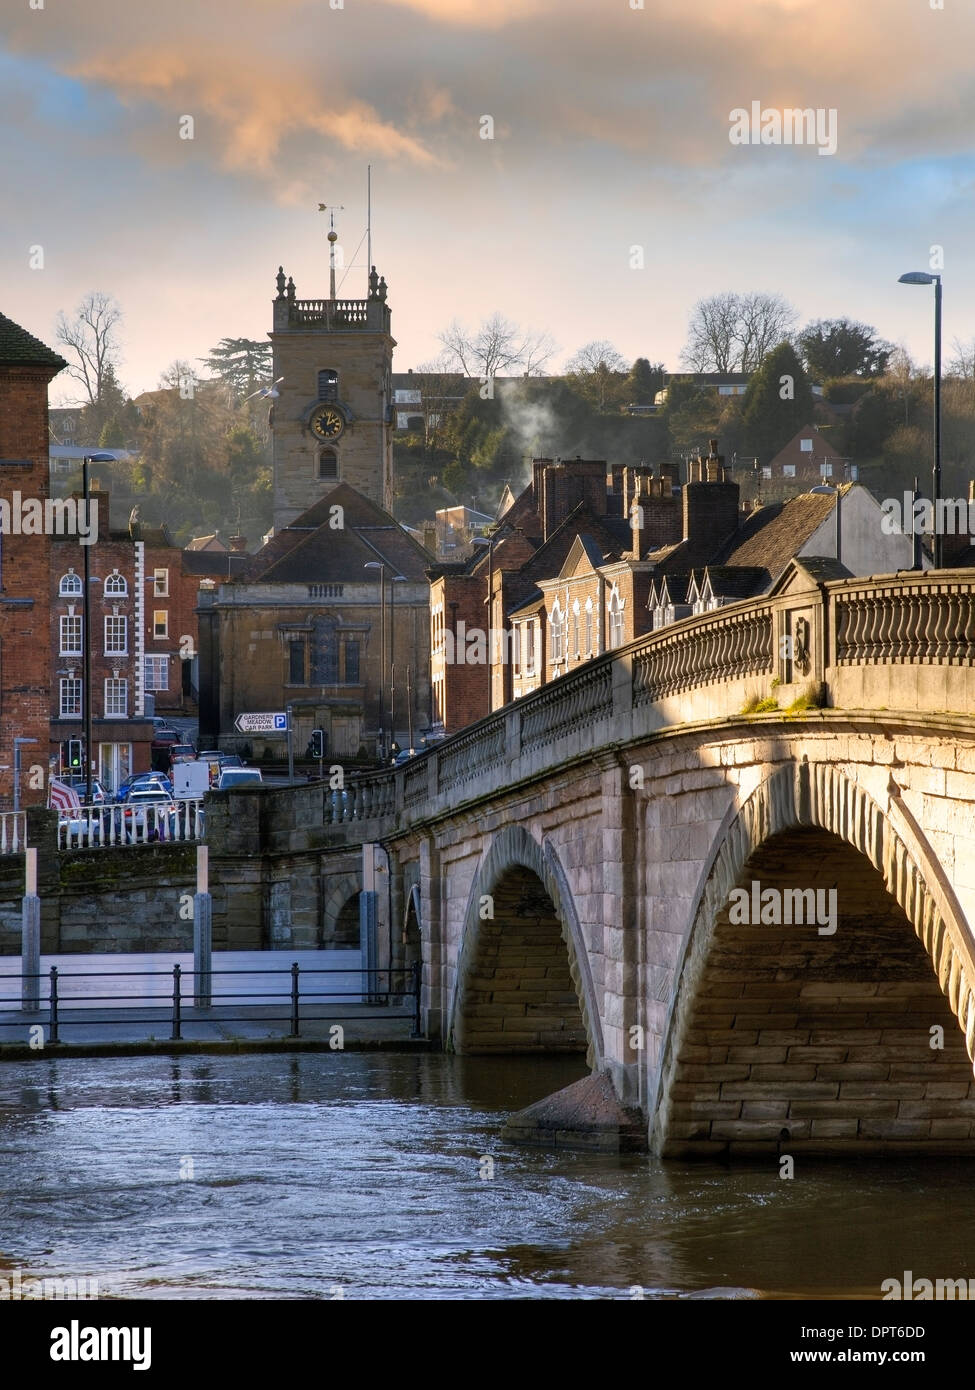 The Worcestershire town of Bewdley, England. Stock Photo